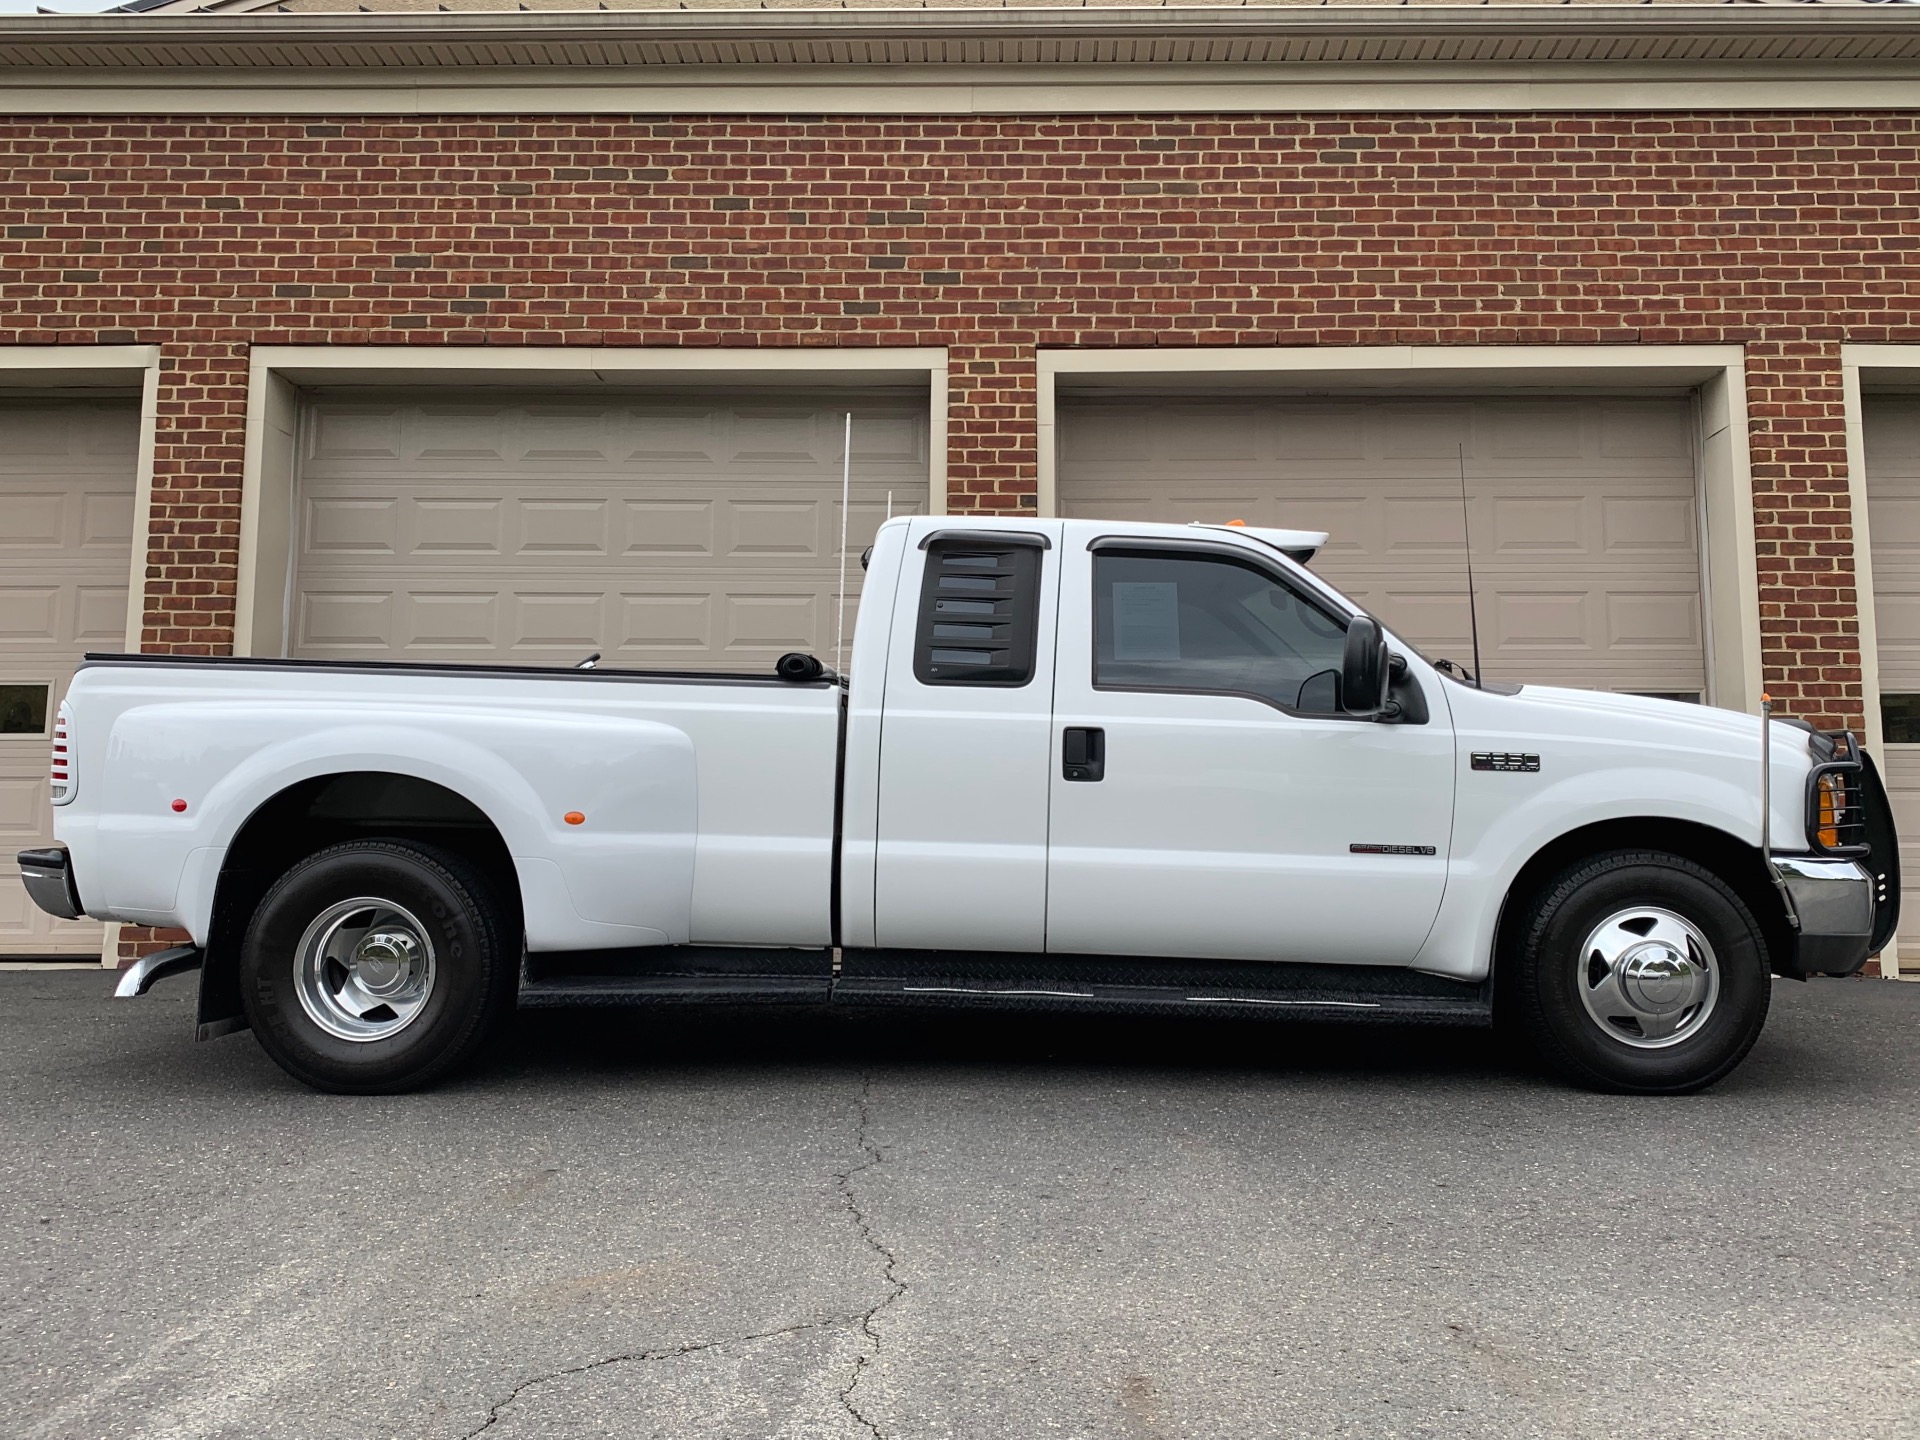 1999 Ford F 350 Super Duty Xlt Dually Stock D50605 For Sale Near